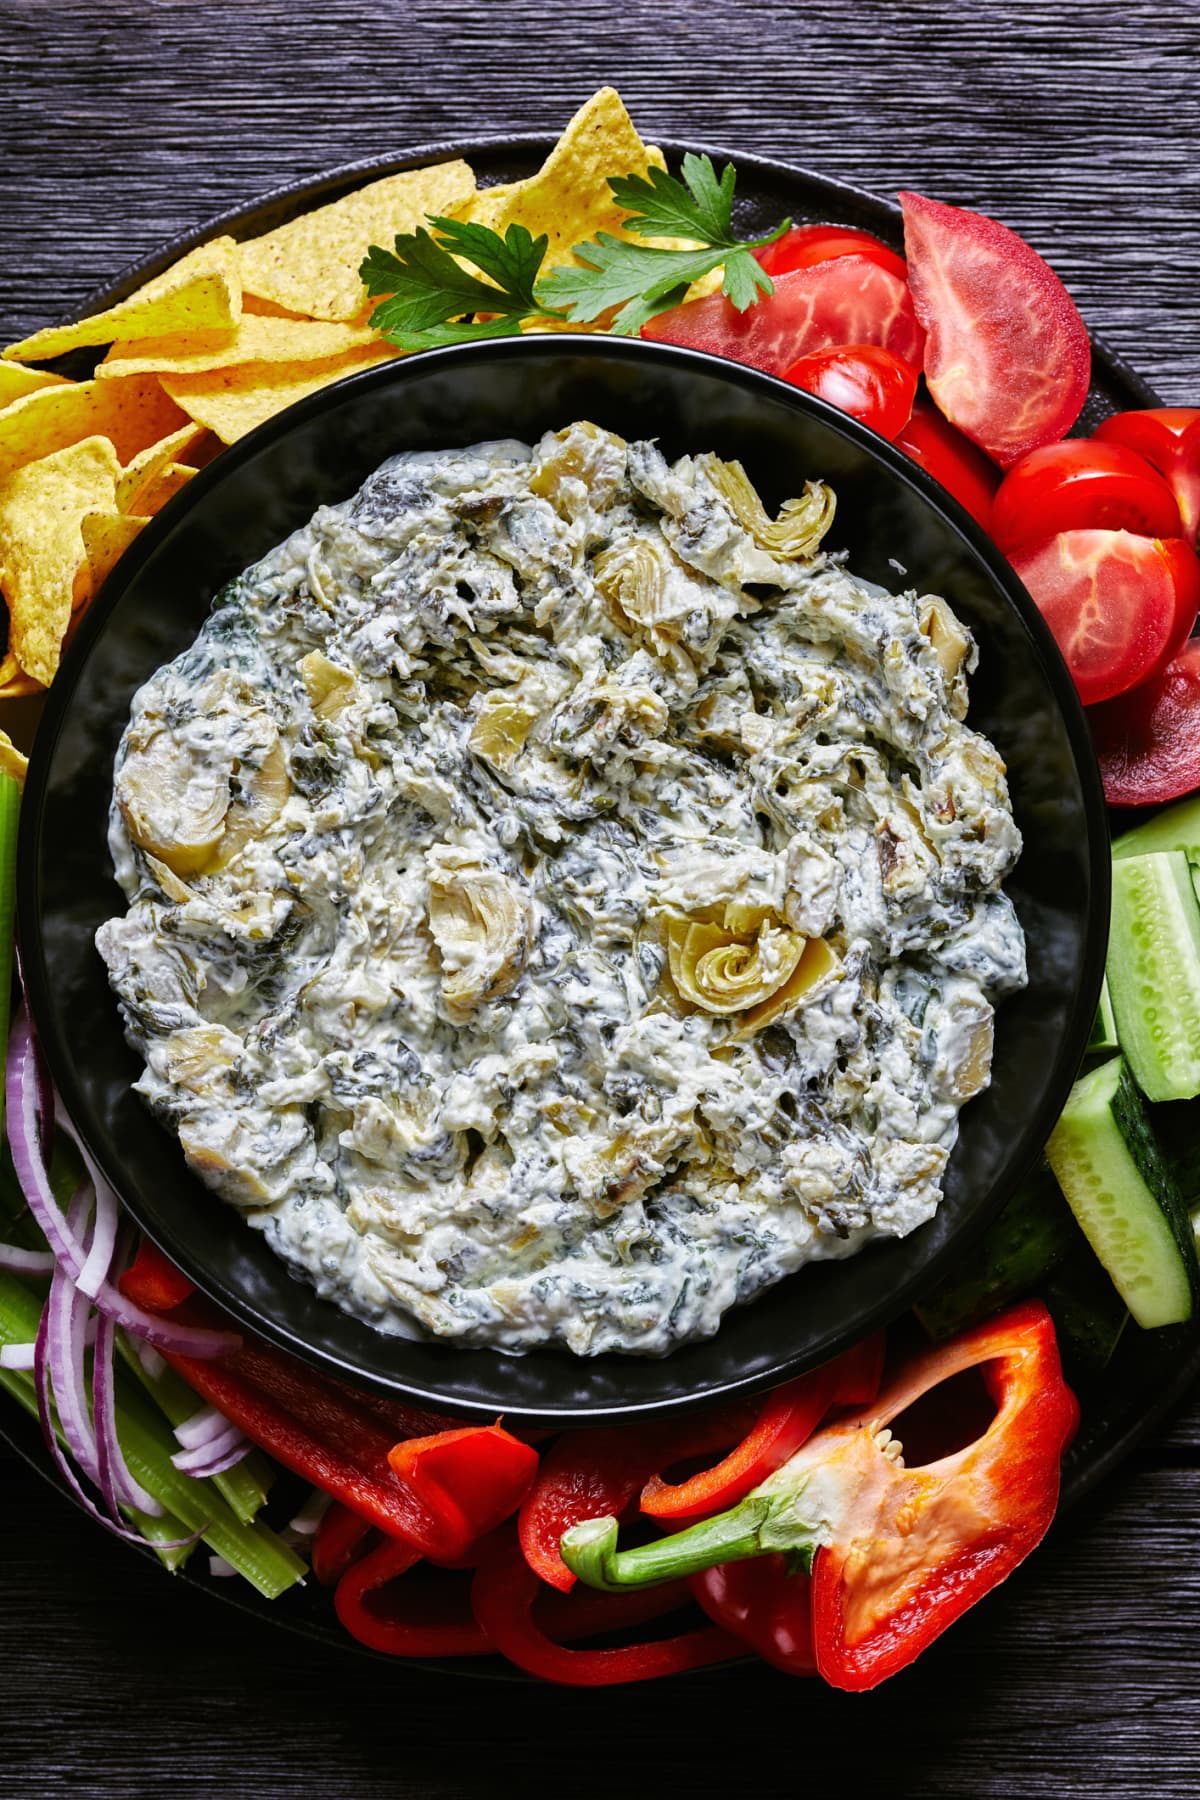 Homemade Creamy Baked Spinach Dip with Toasted Bread